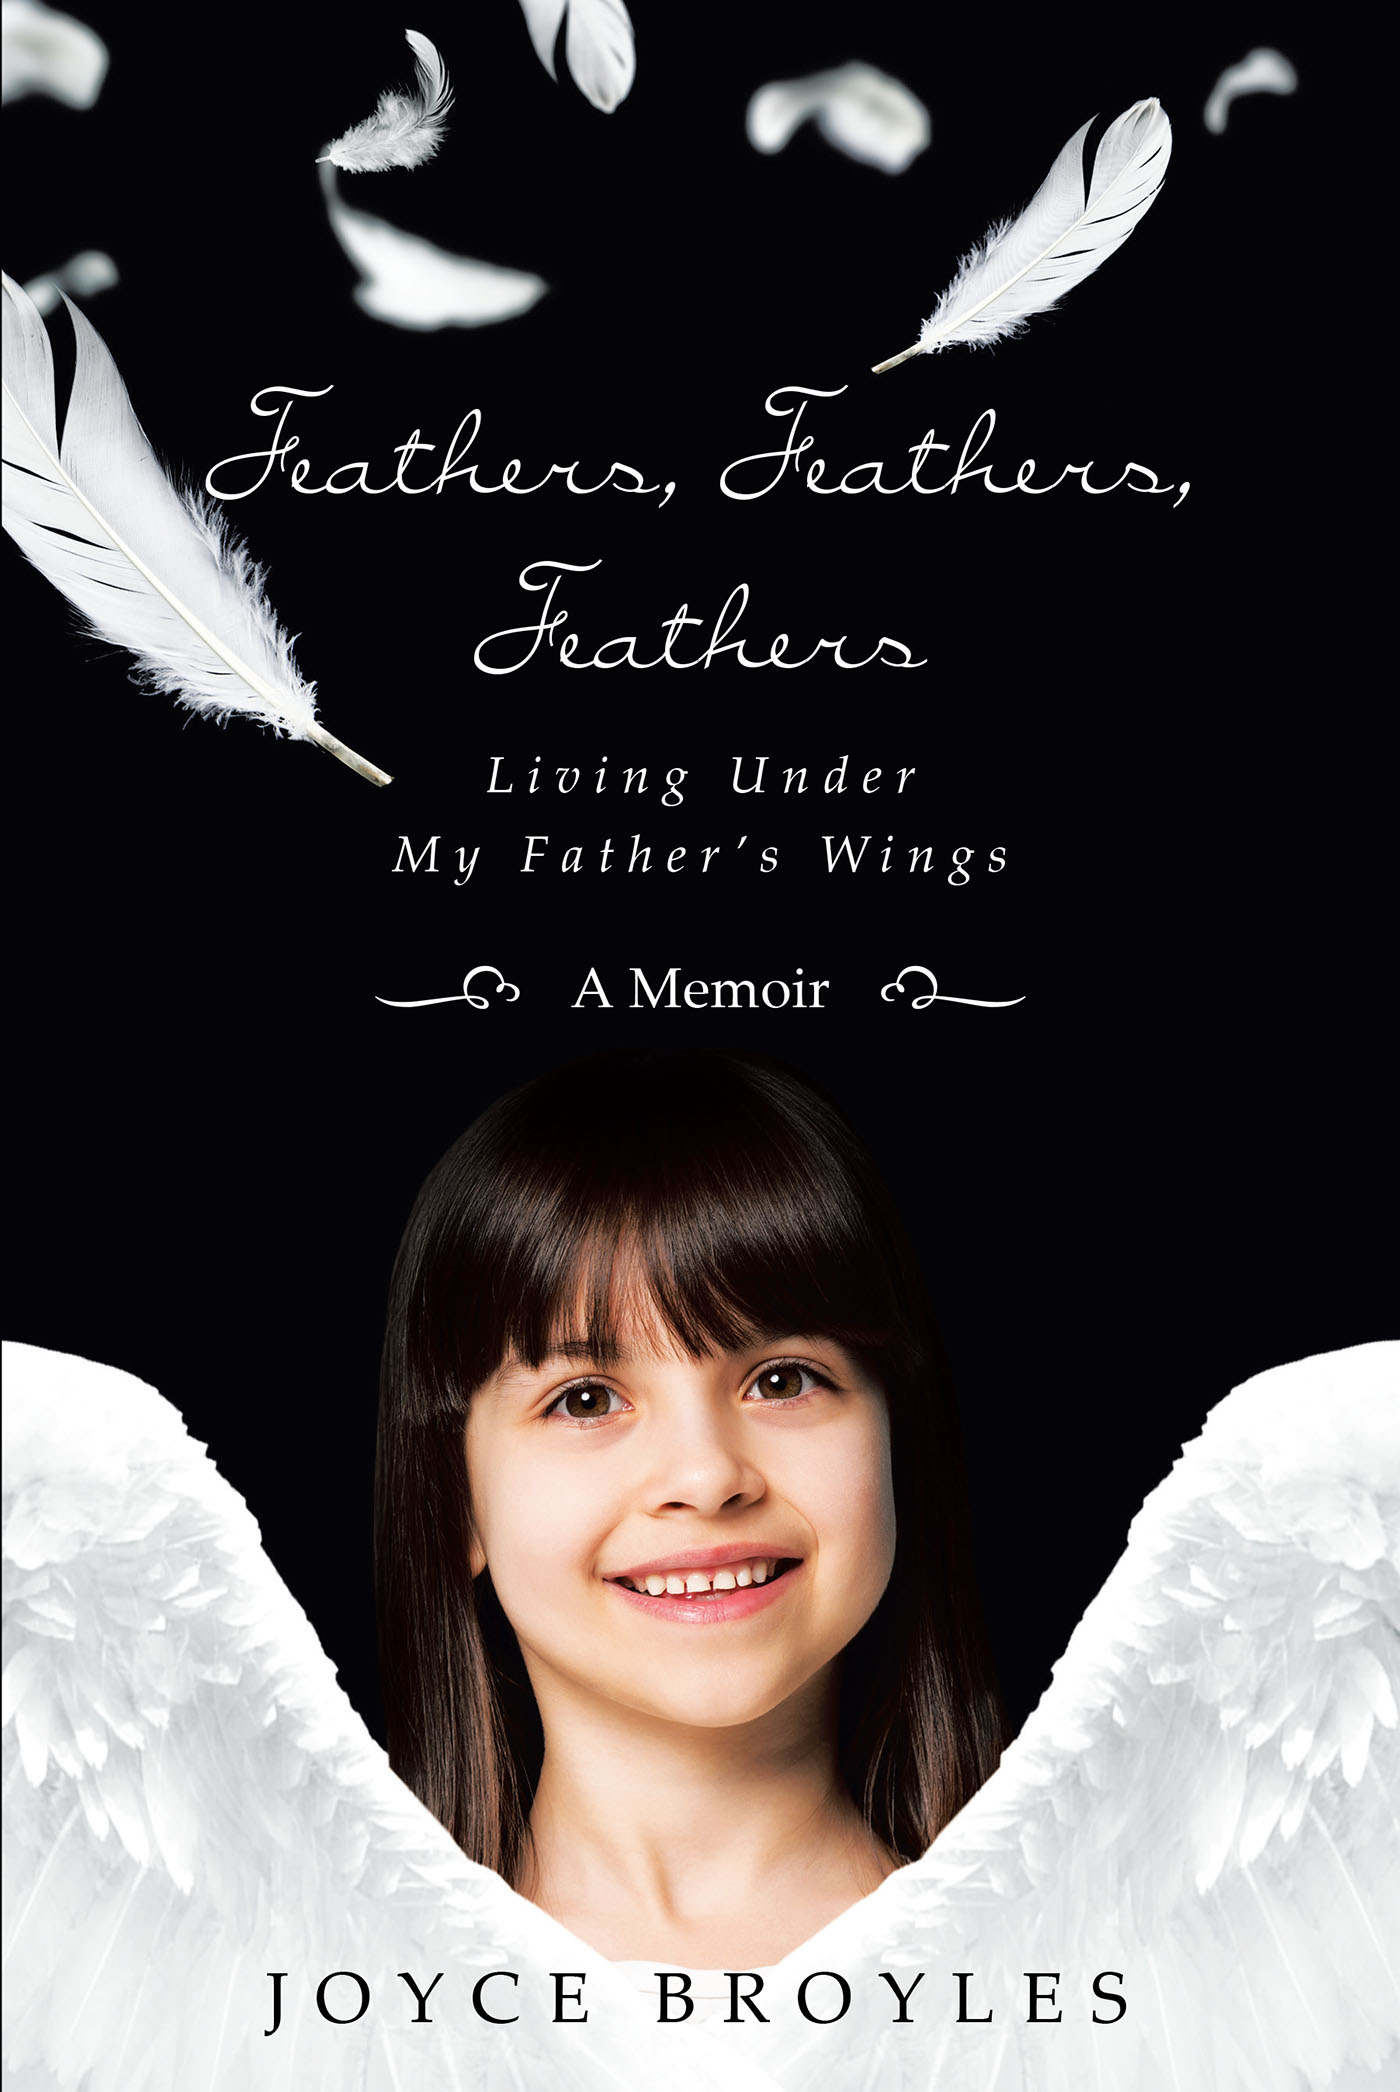 Joyce Broyles’s New Book "Feathers, Feathers, Feathers" is a Memoir About How the Author and Her Family Followed God’s Directions, Traveling and Ministering